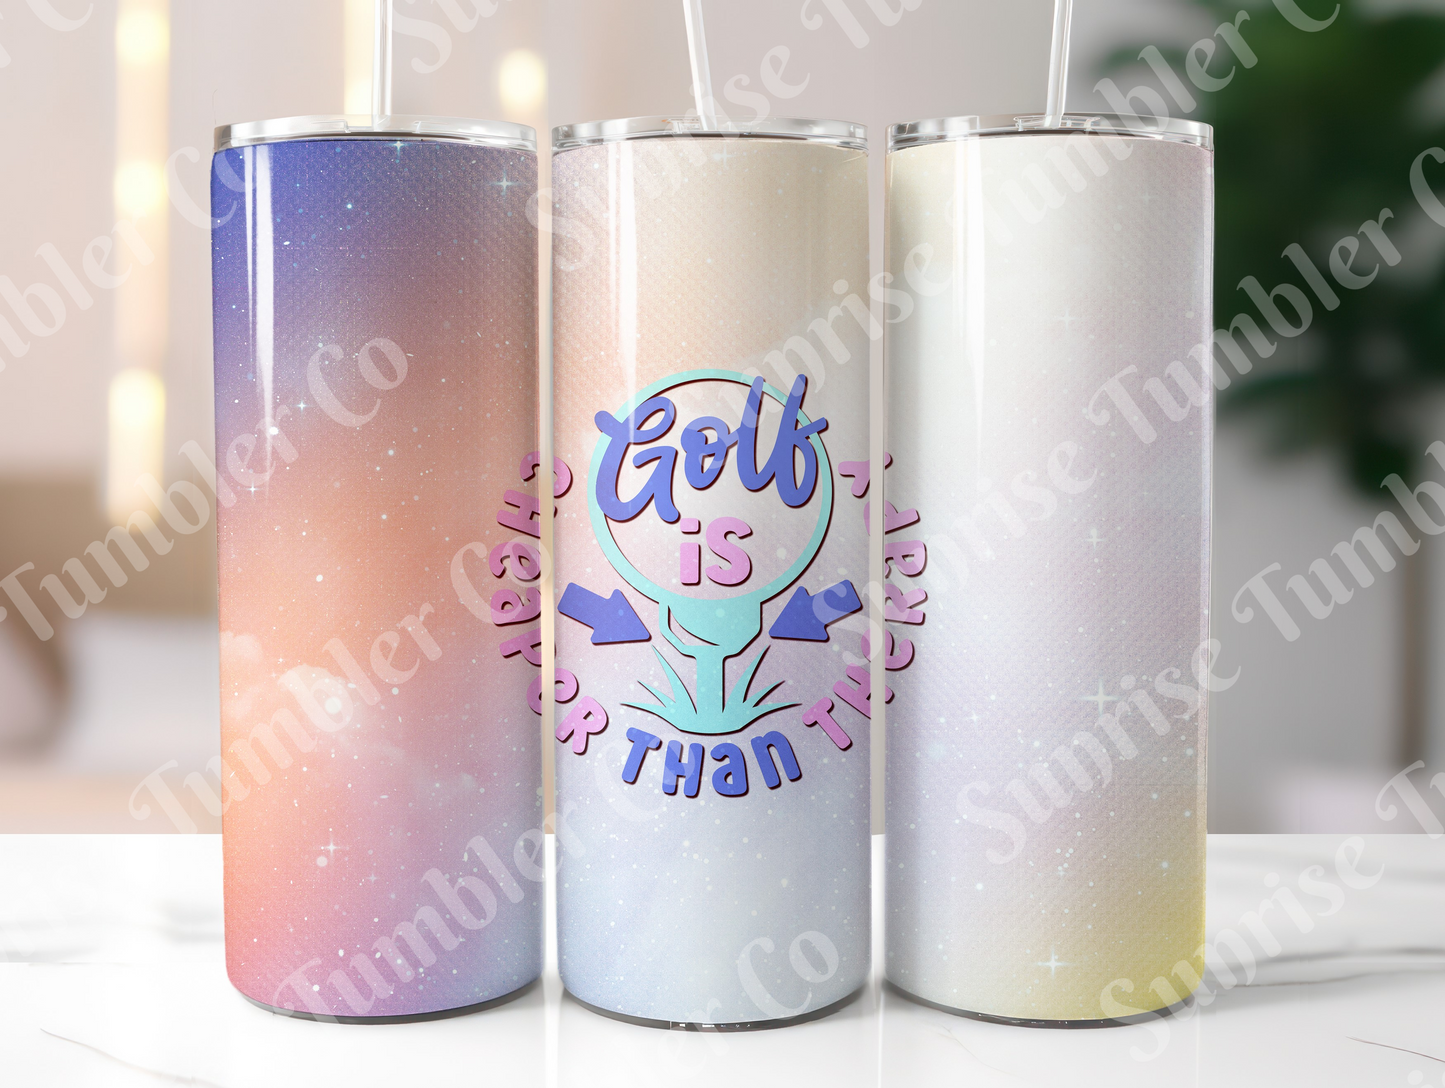 Golf Variety Part 3 - 20oz and 30oz Tumblers (Glow In The Dark Green And Blue Available)